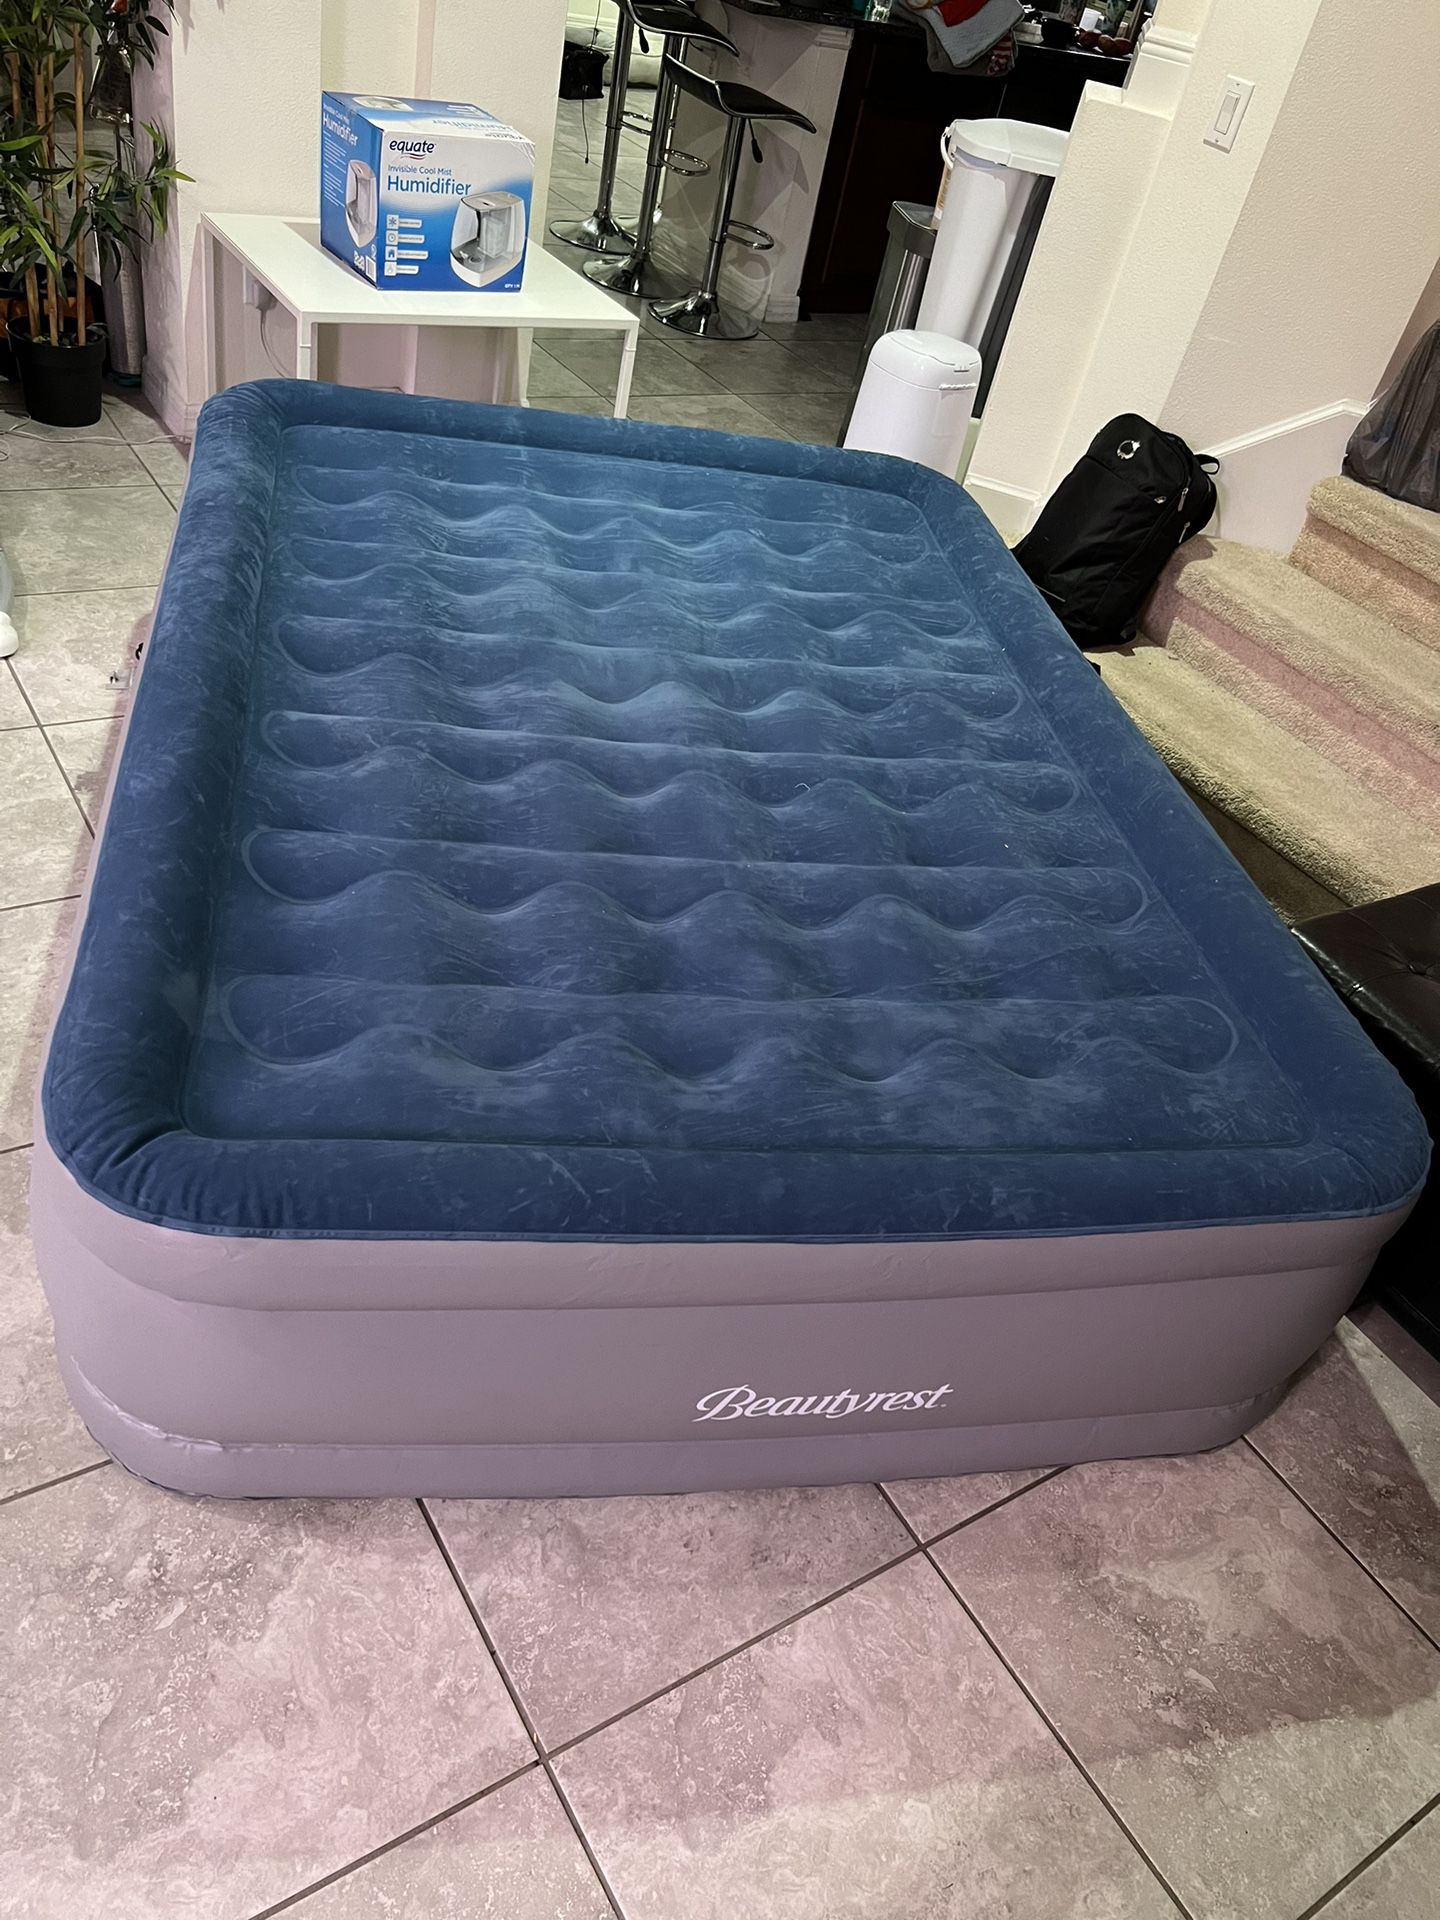 New from $100 only $59!  18" Queen Inflatable Blow up Air Bed Mattress with Built-in Pump / colchon auto inflable